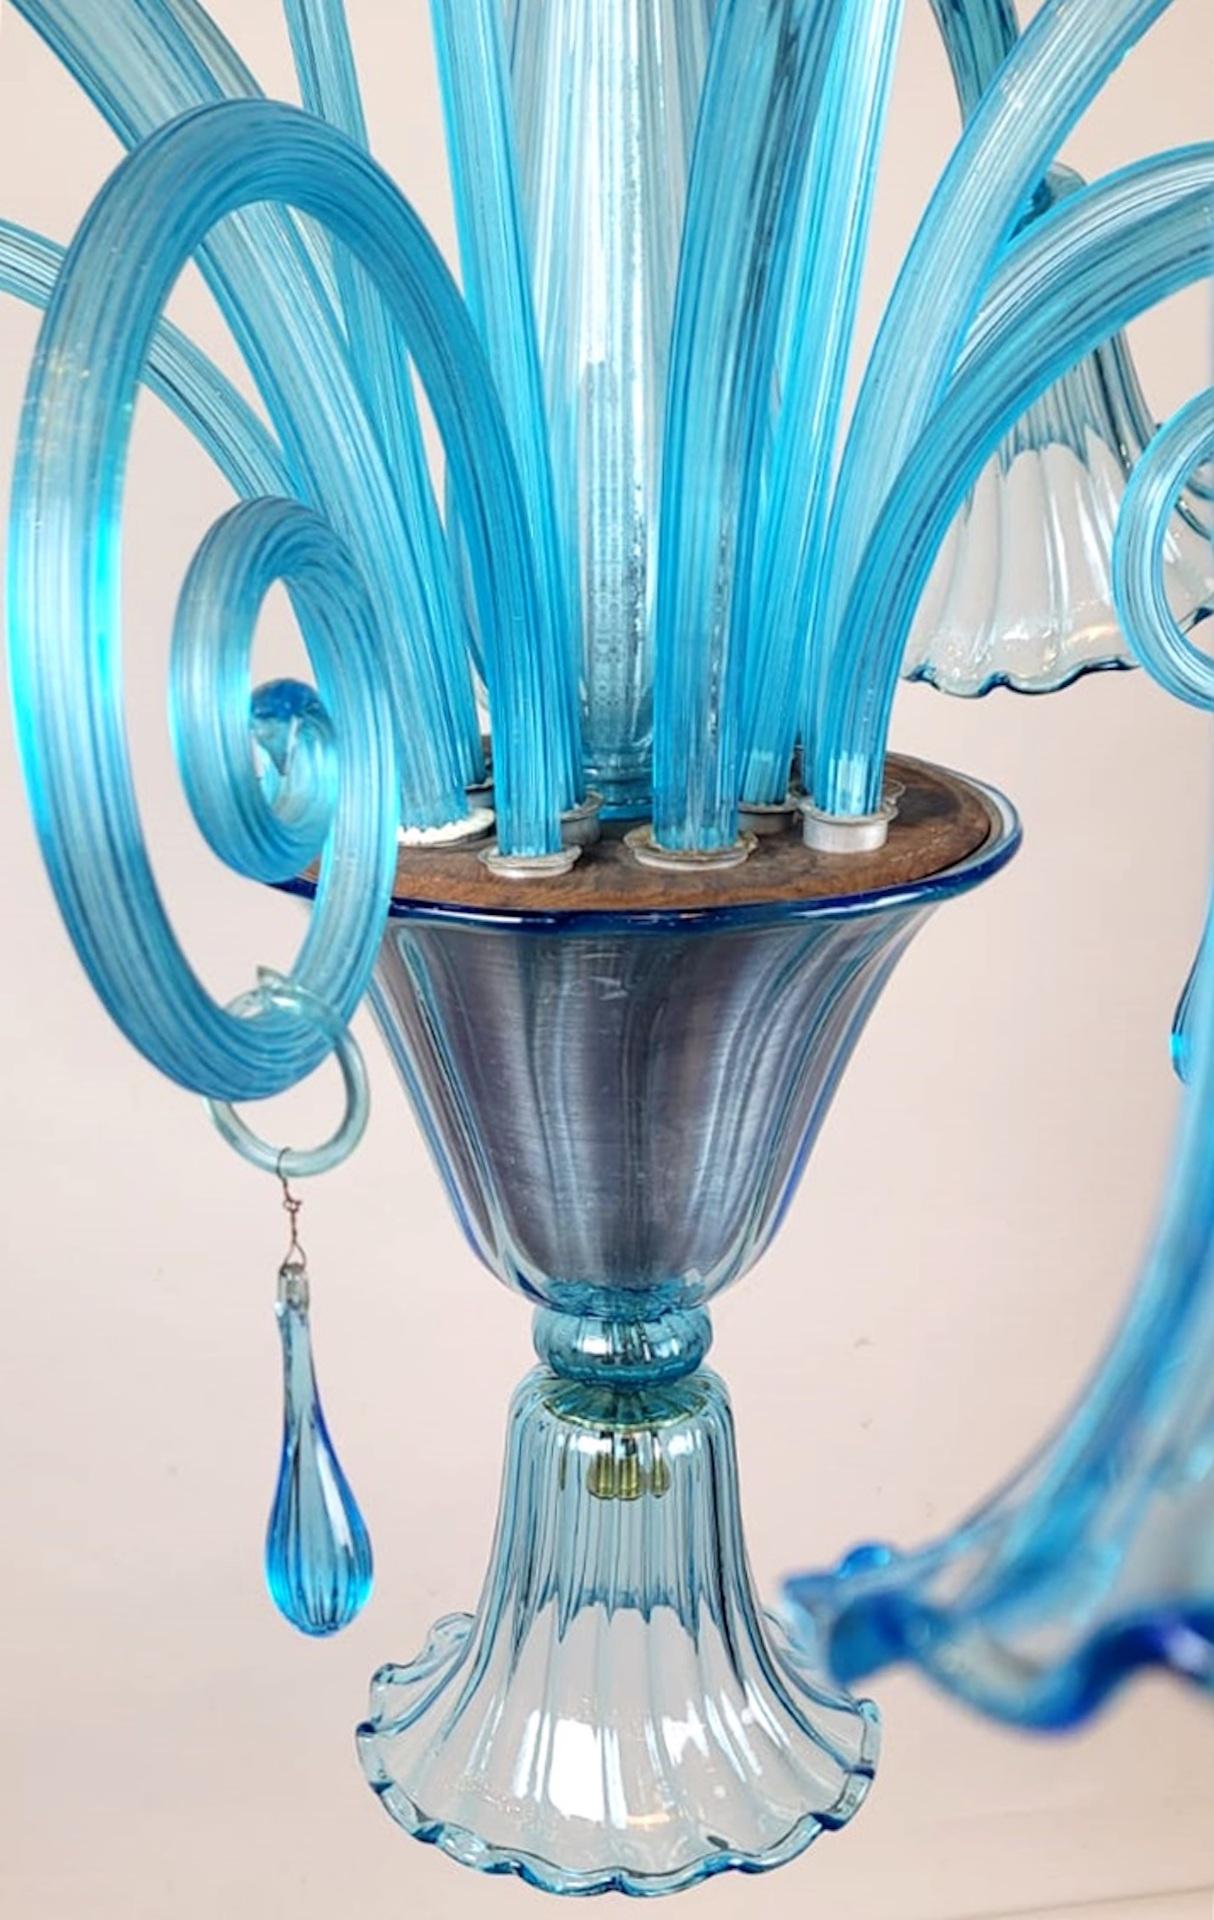 Mid-20th Century Murano Blue Glass Chandelier - 5 Arms Of Light, 1940s For Sale